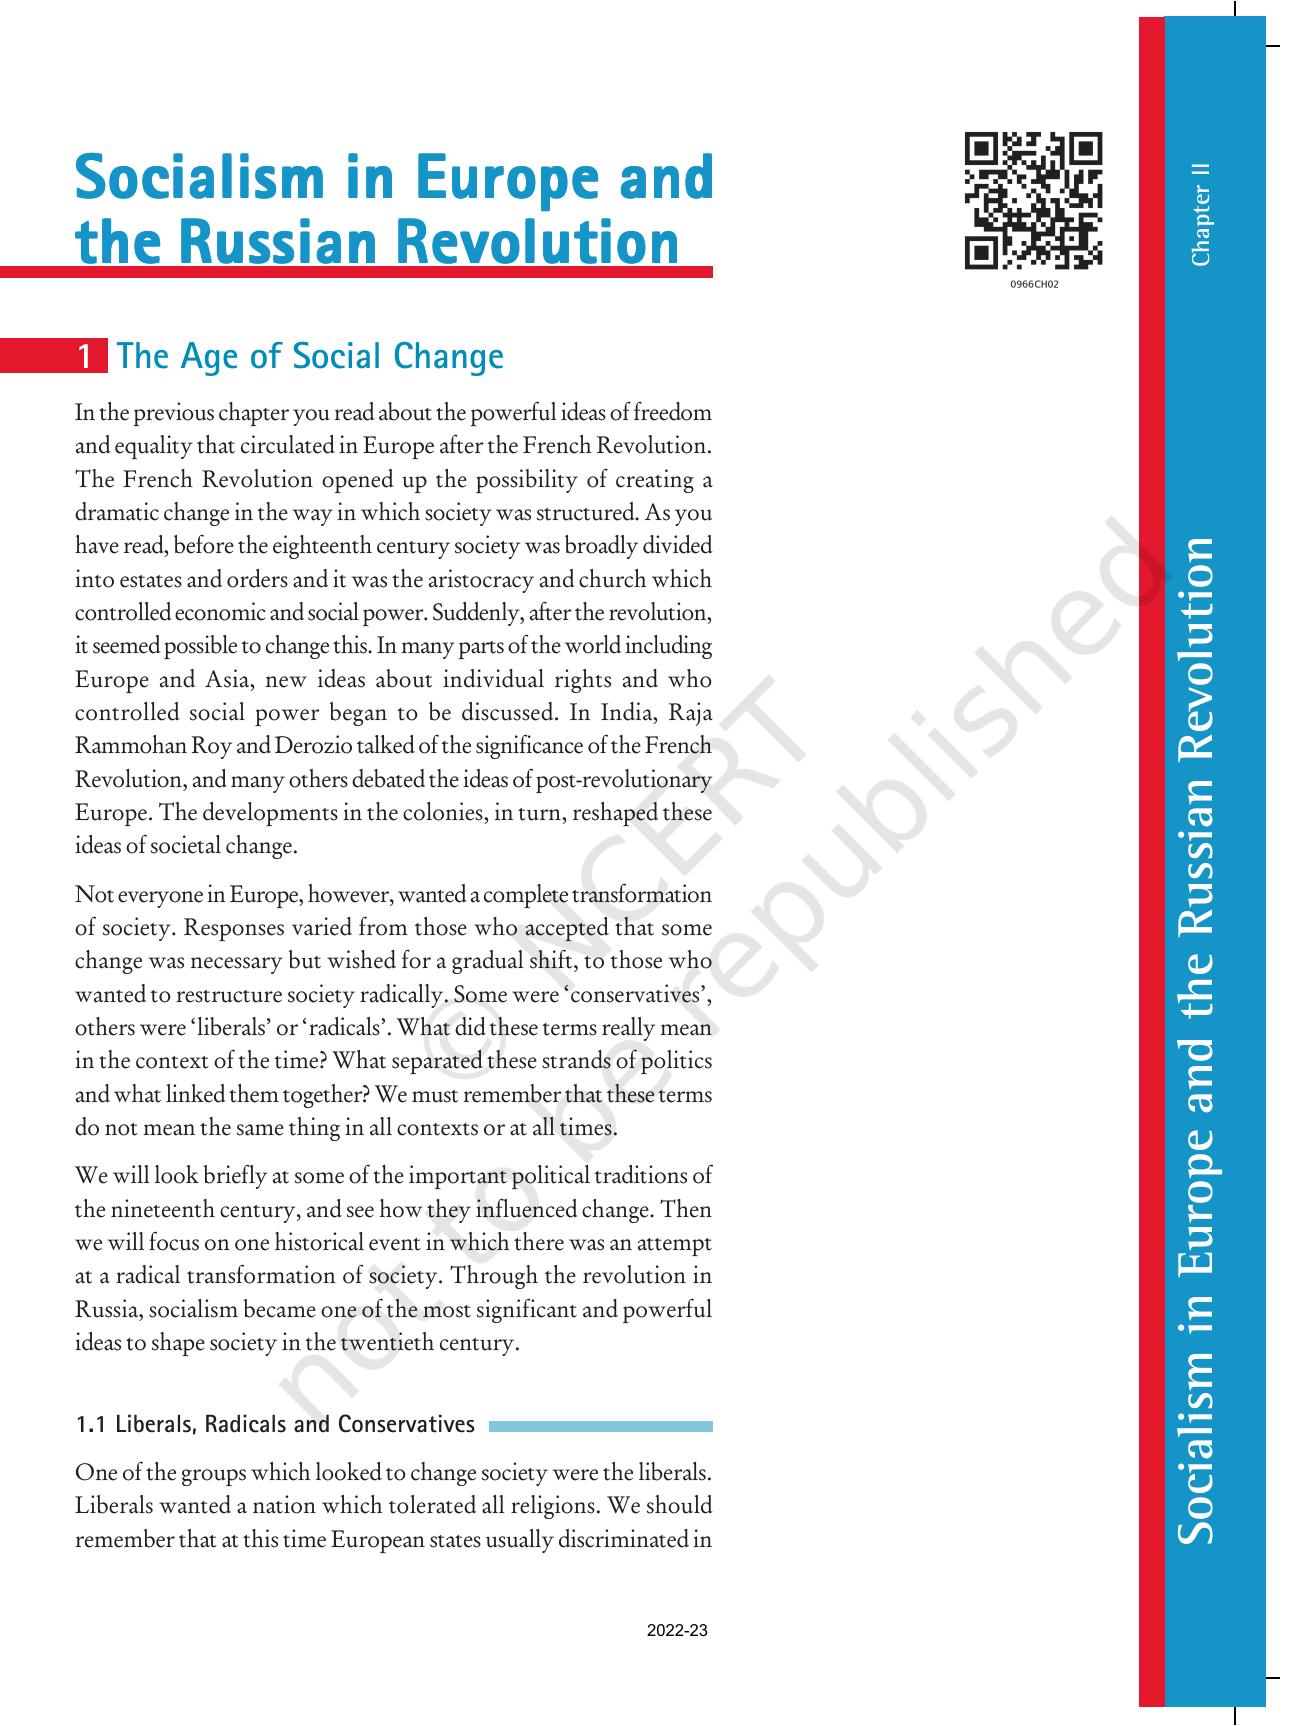 NCERT Book for Class 9 History Chapter 2 Socialism in Europe and the Russian Revolution - Page 1